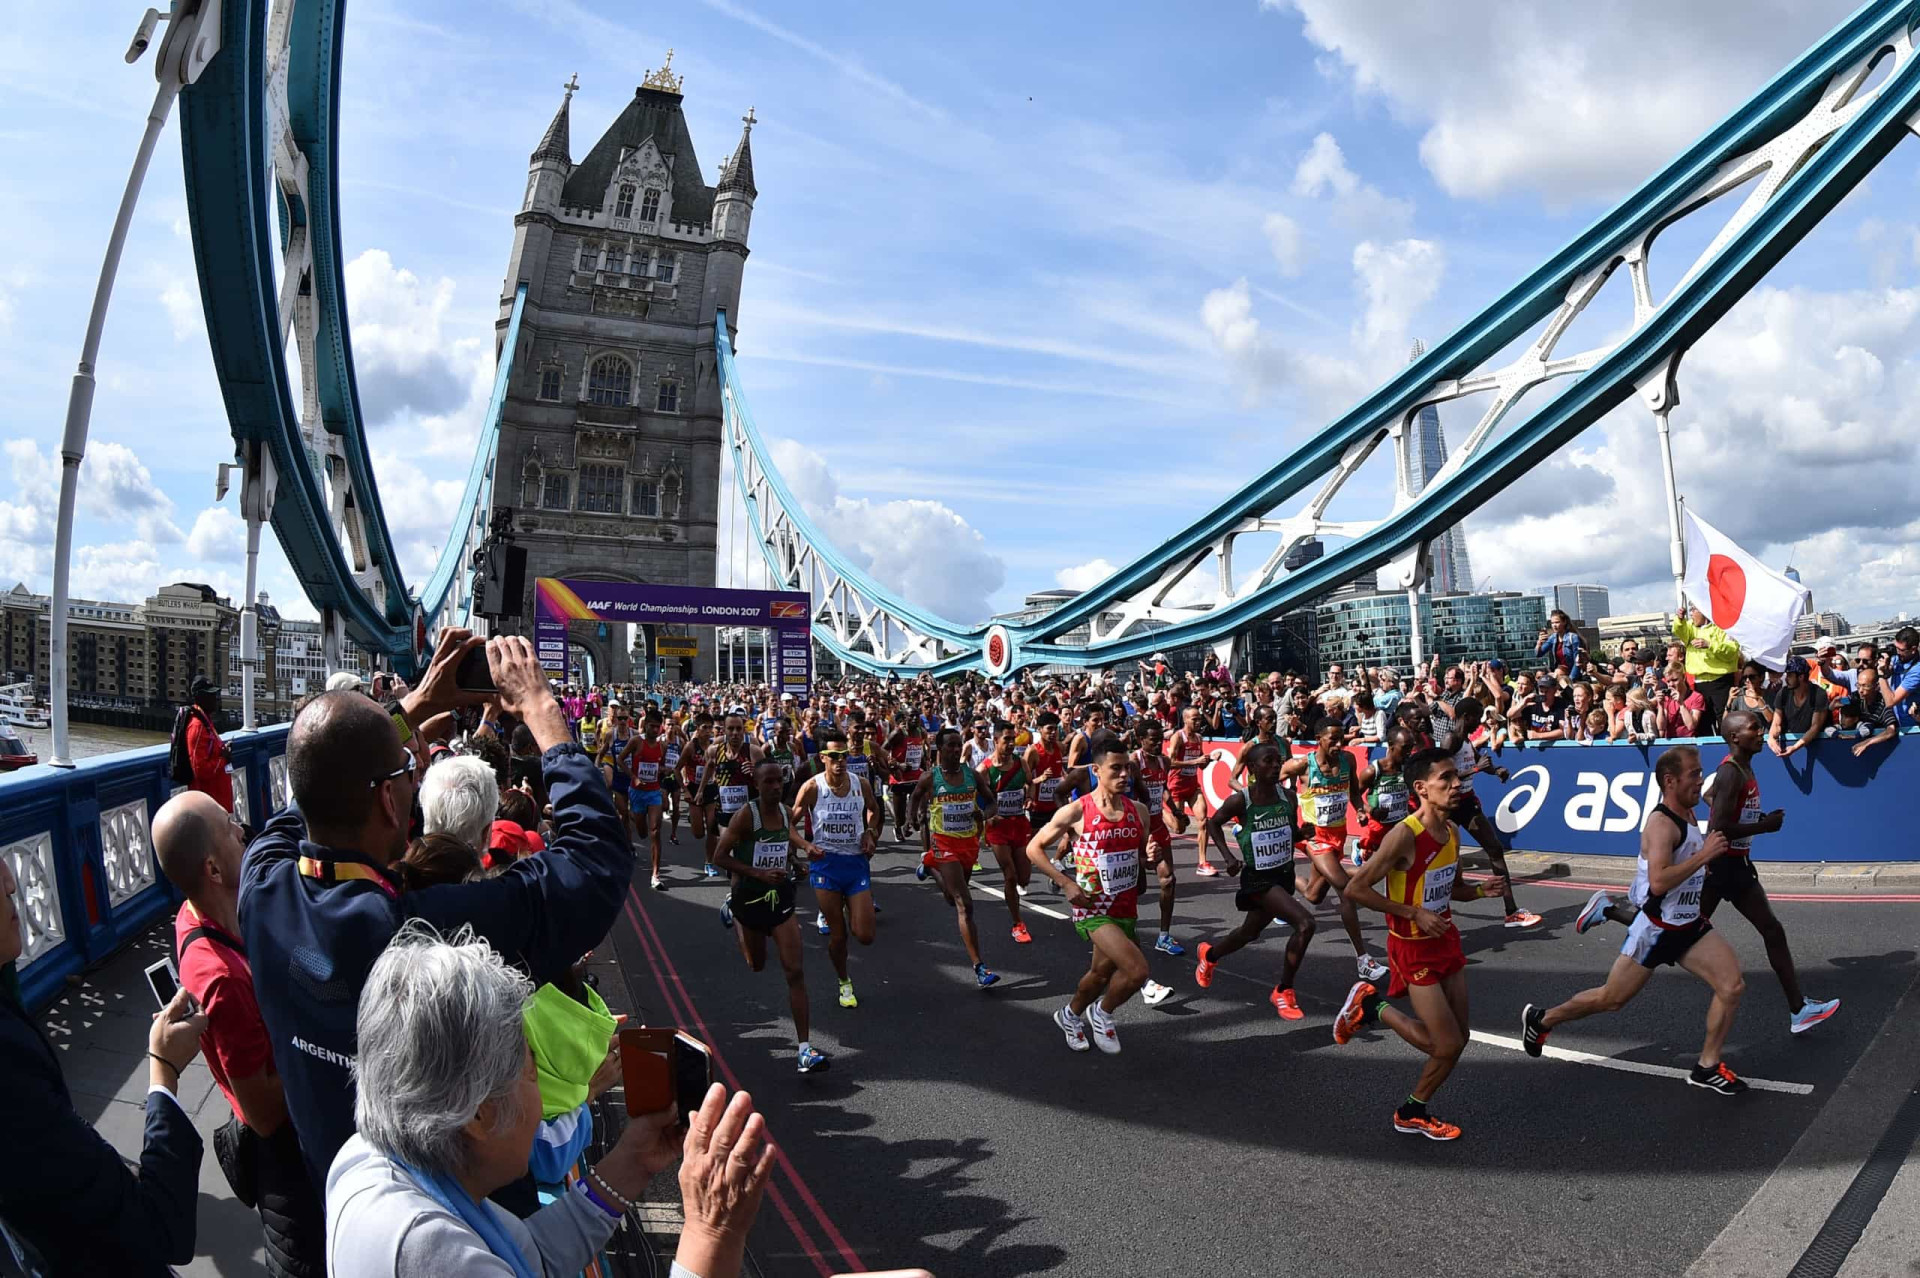 <div>The marathon was one of the original modern Olympic events in 1896. The grueling foot race, a test of endurance and stamina, is held over a distance of 42.195 km (26.2 mi), a distance allegedly established by British royalty in 1908 during the Summer Olympic Games in London when Queen Alexandra requested the starting line be set on the lawn of Windsor Castle and the finish in front of the royal box at the Olympic Stadium—a distance that's still run today.</div><p><a href="https://www.msn.com/en-ph/community/channel/vid-7xx8mnucu55yw63we9va2gwr7uihbxwc68fxqp25x6tg4ftibpra?cvid=94631541bc0f4f89bfd59158d696ad7e">Follow us and access great exclusive content every day</a></p>